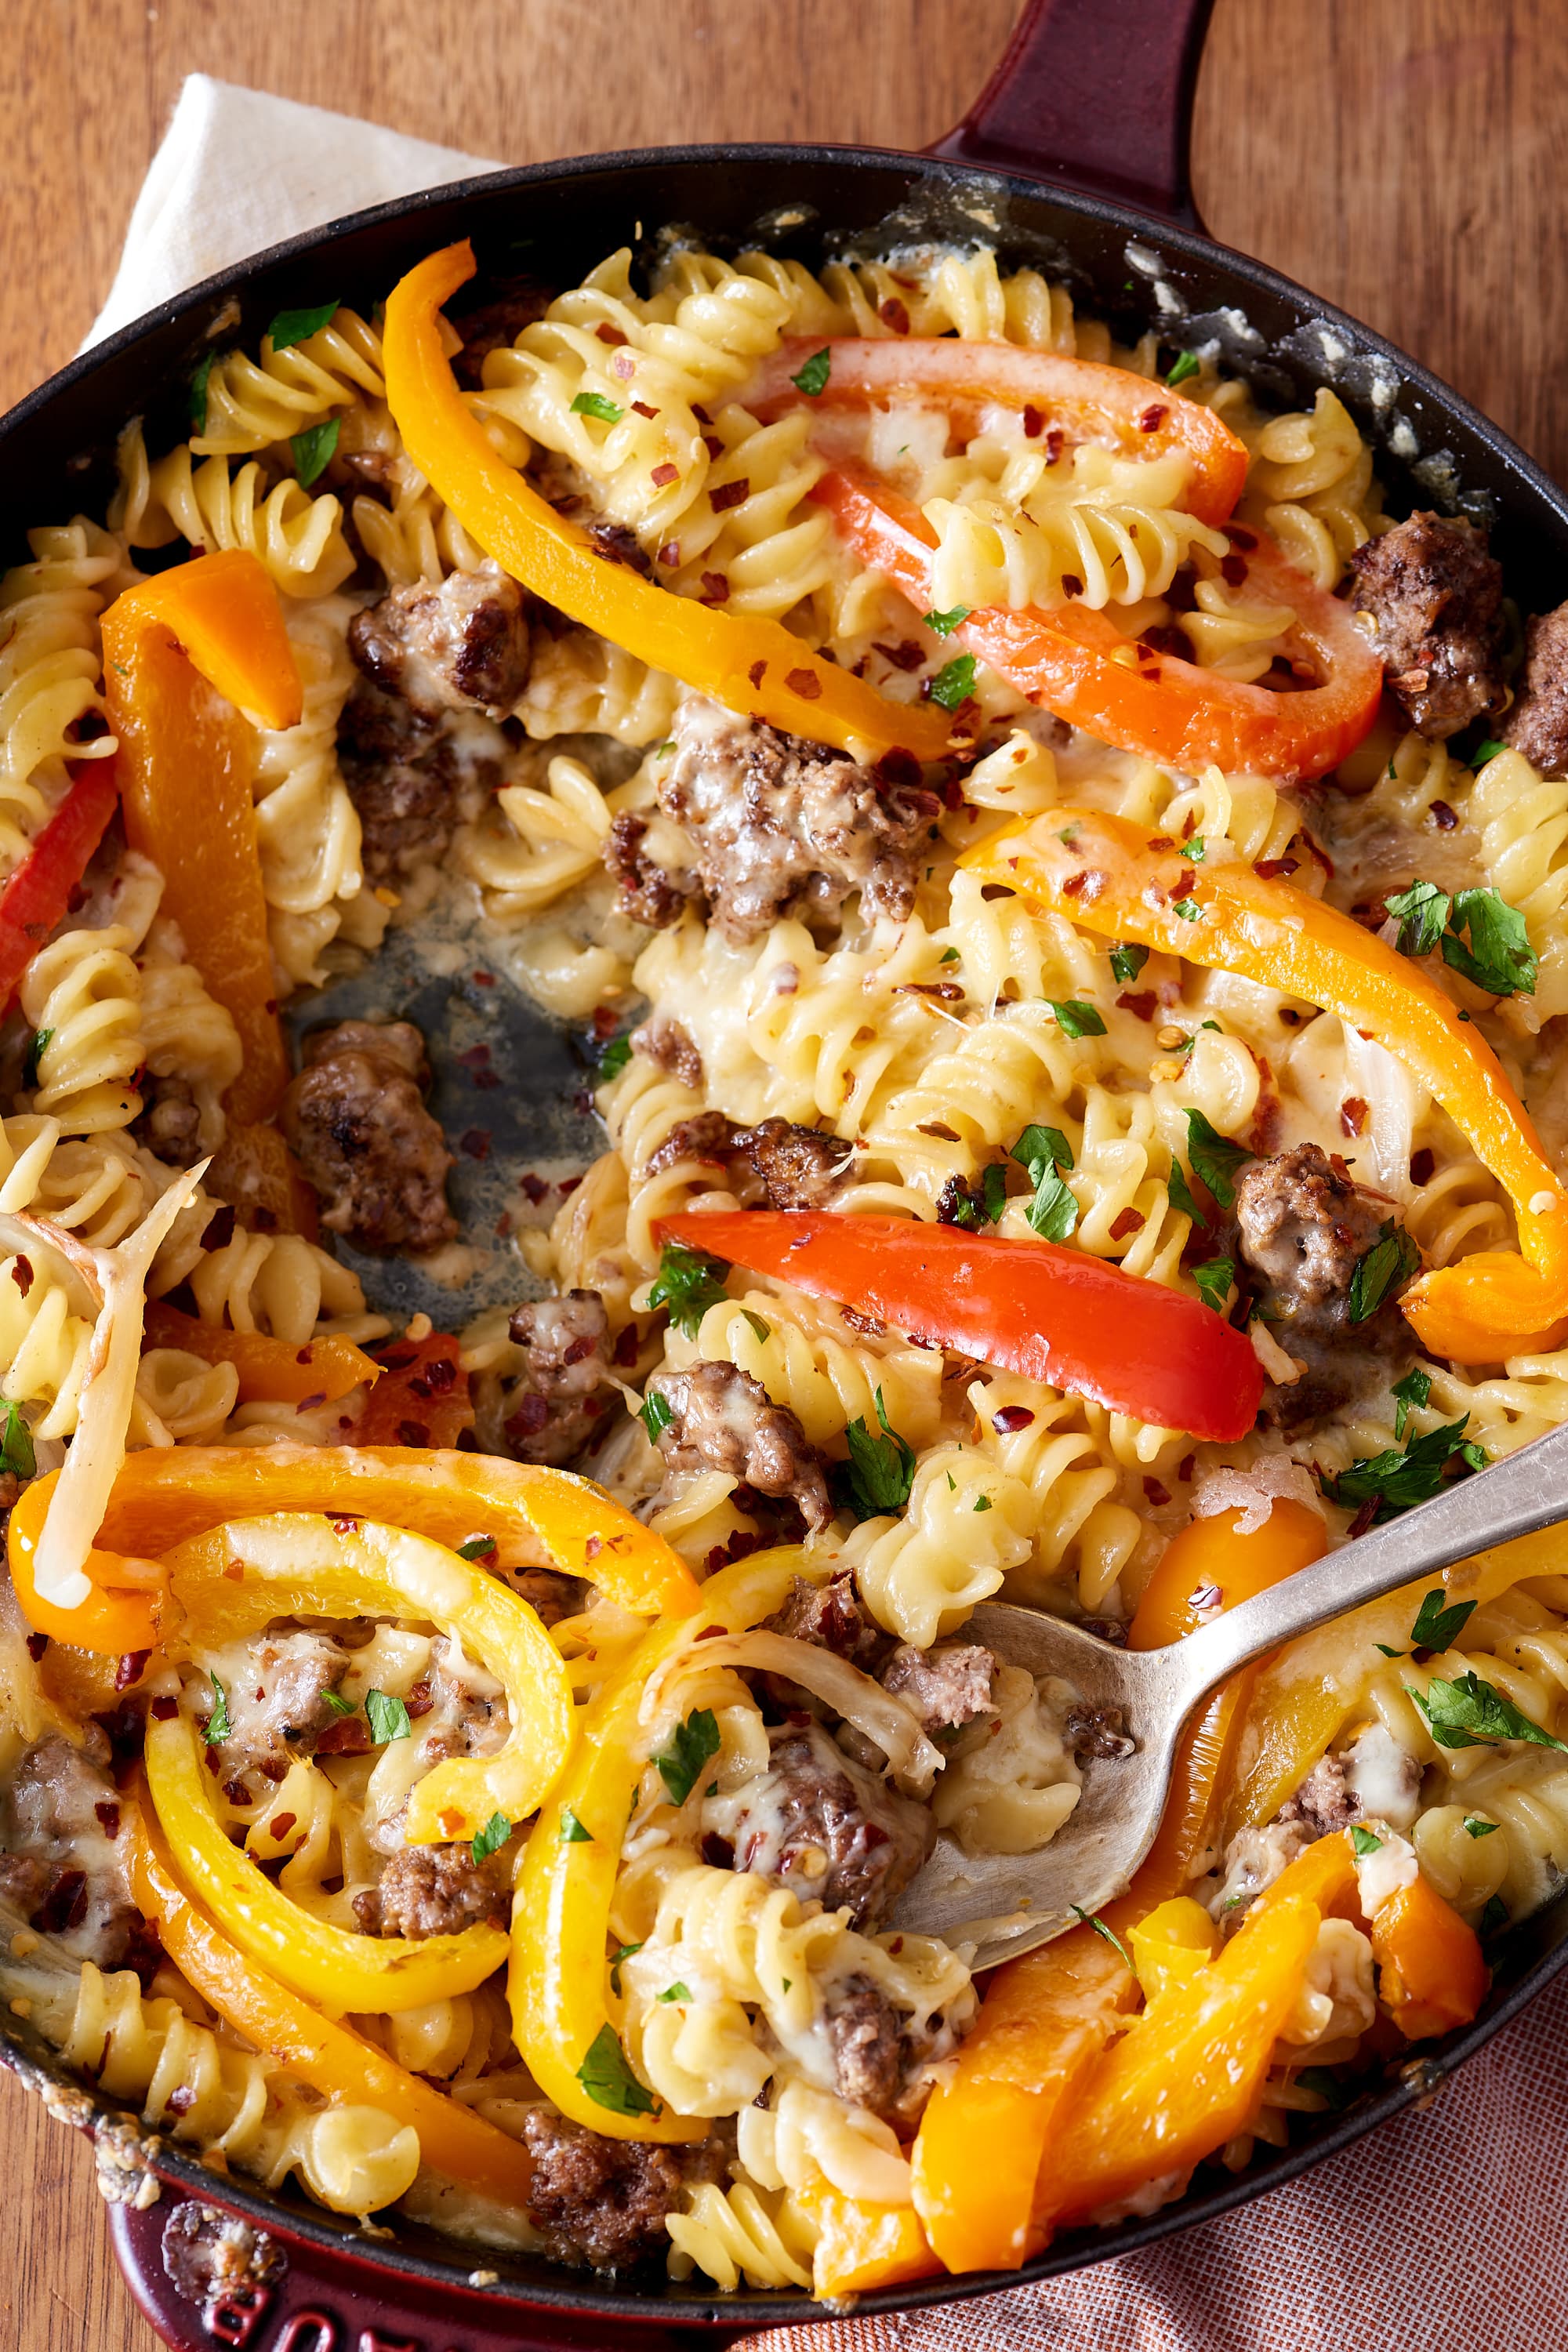 25 One-Pan Meals You Can Make in Under an Hour